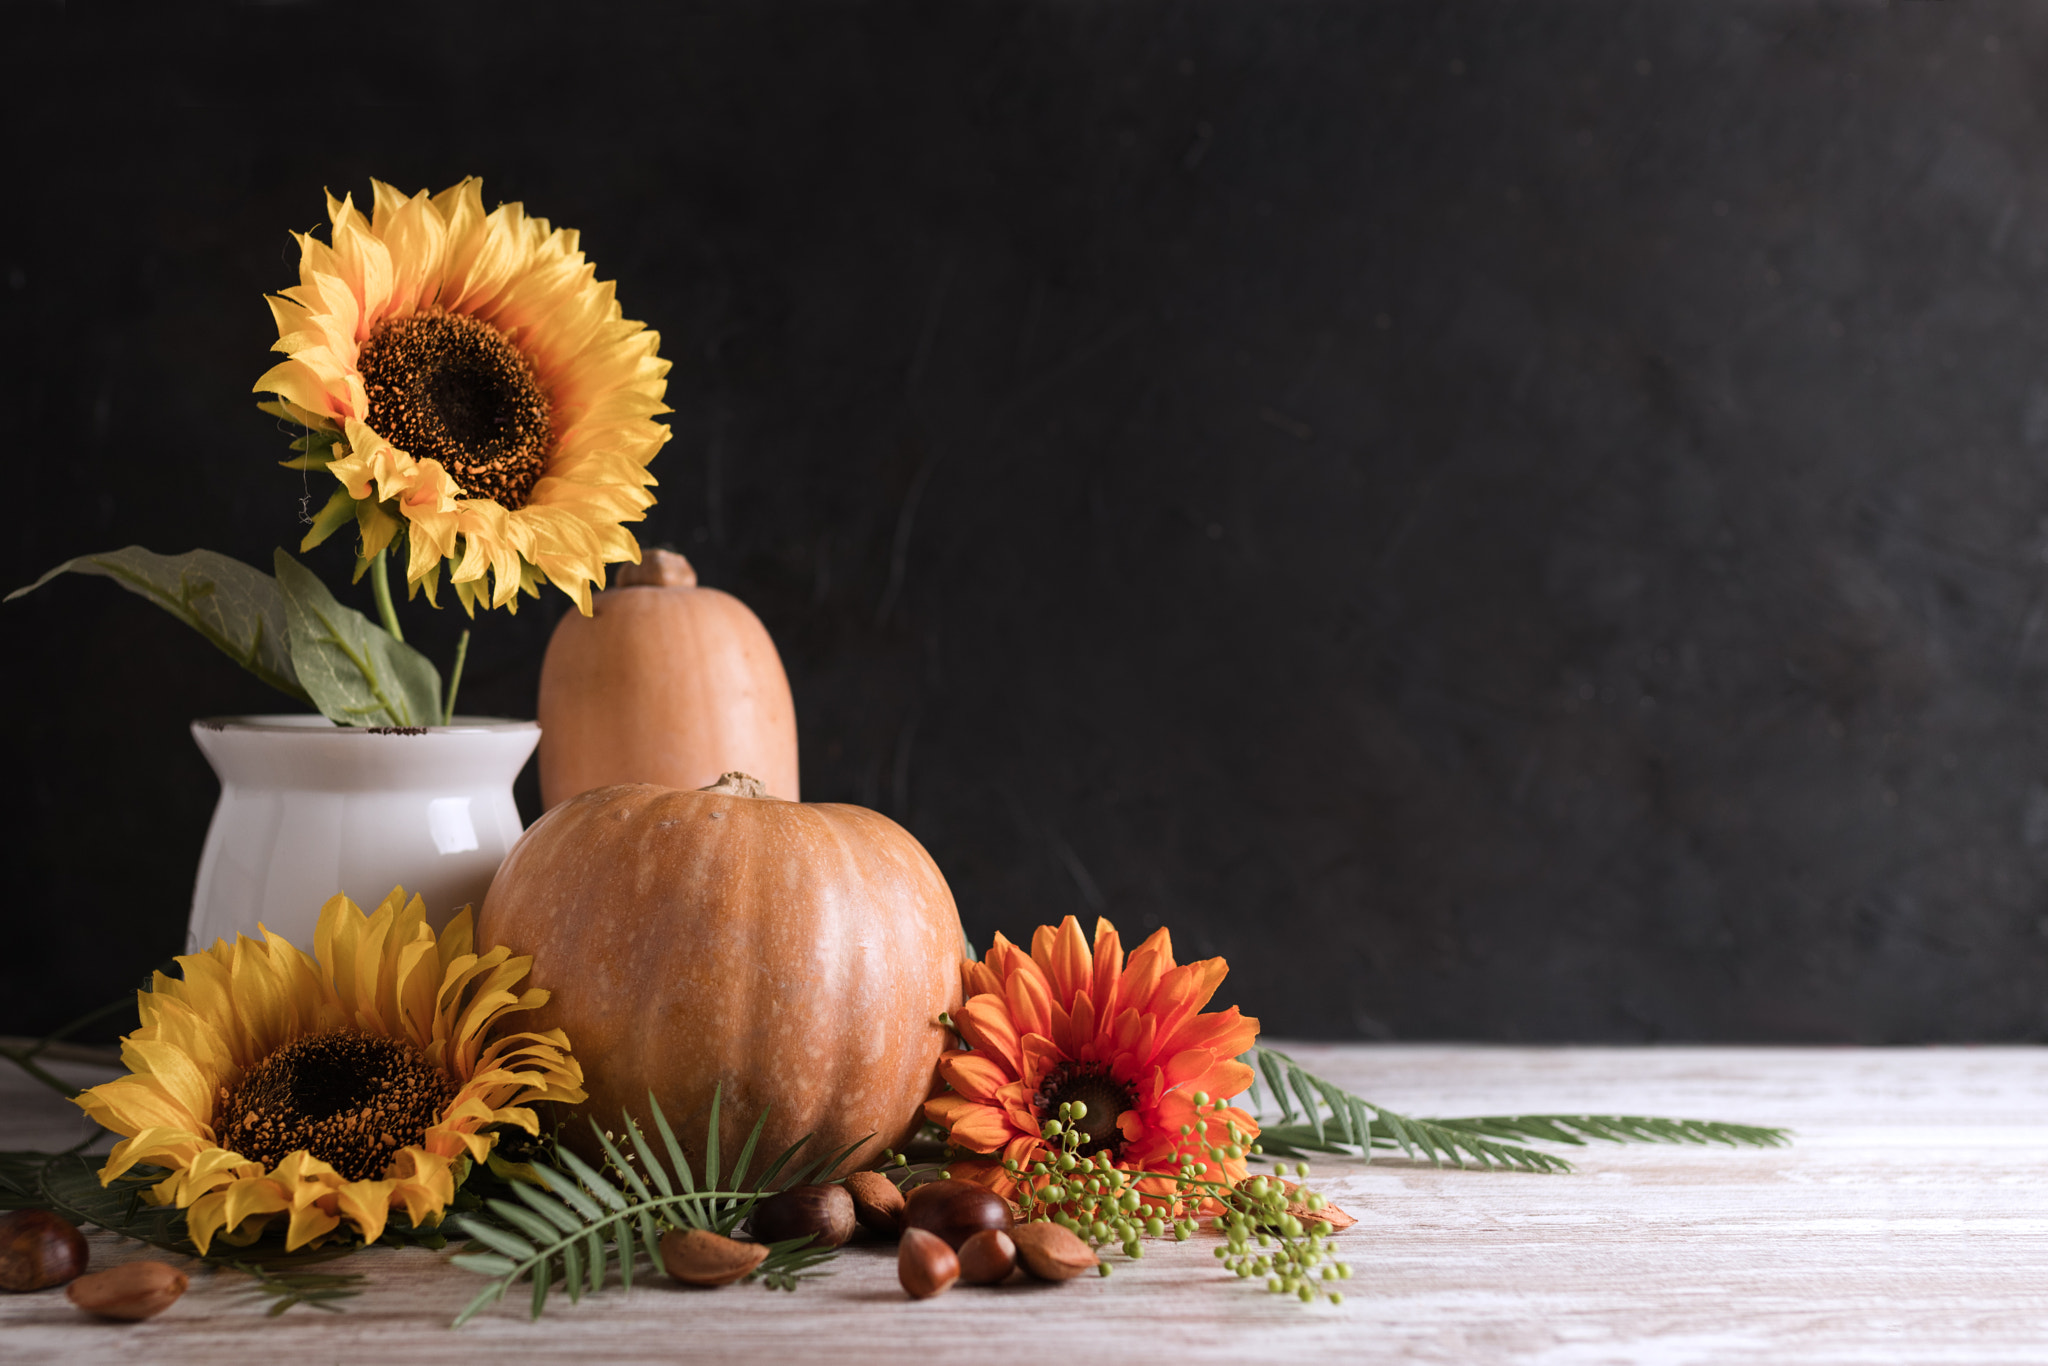 Autumn still life with pumpkin, sunflowers on a vase, orange flowers and nuts front view. Autumn con